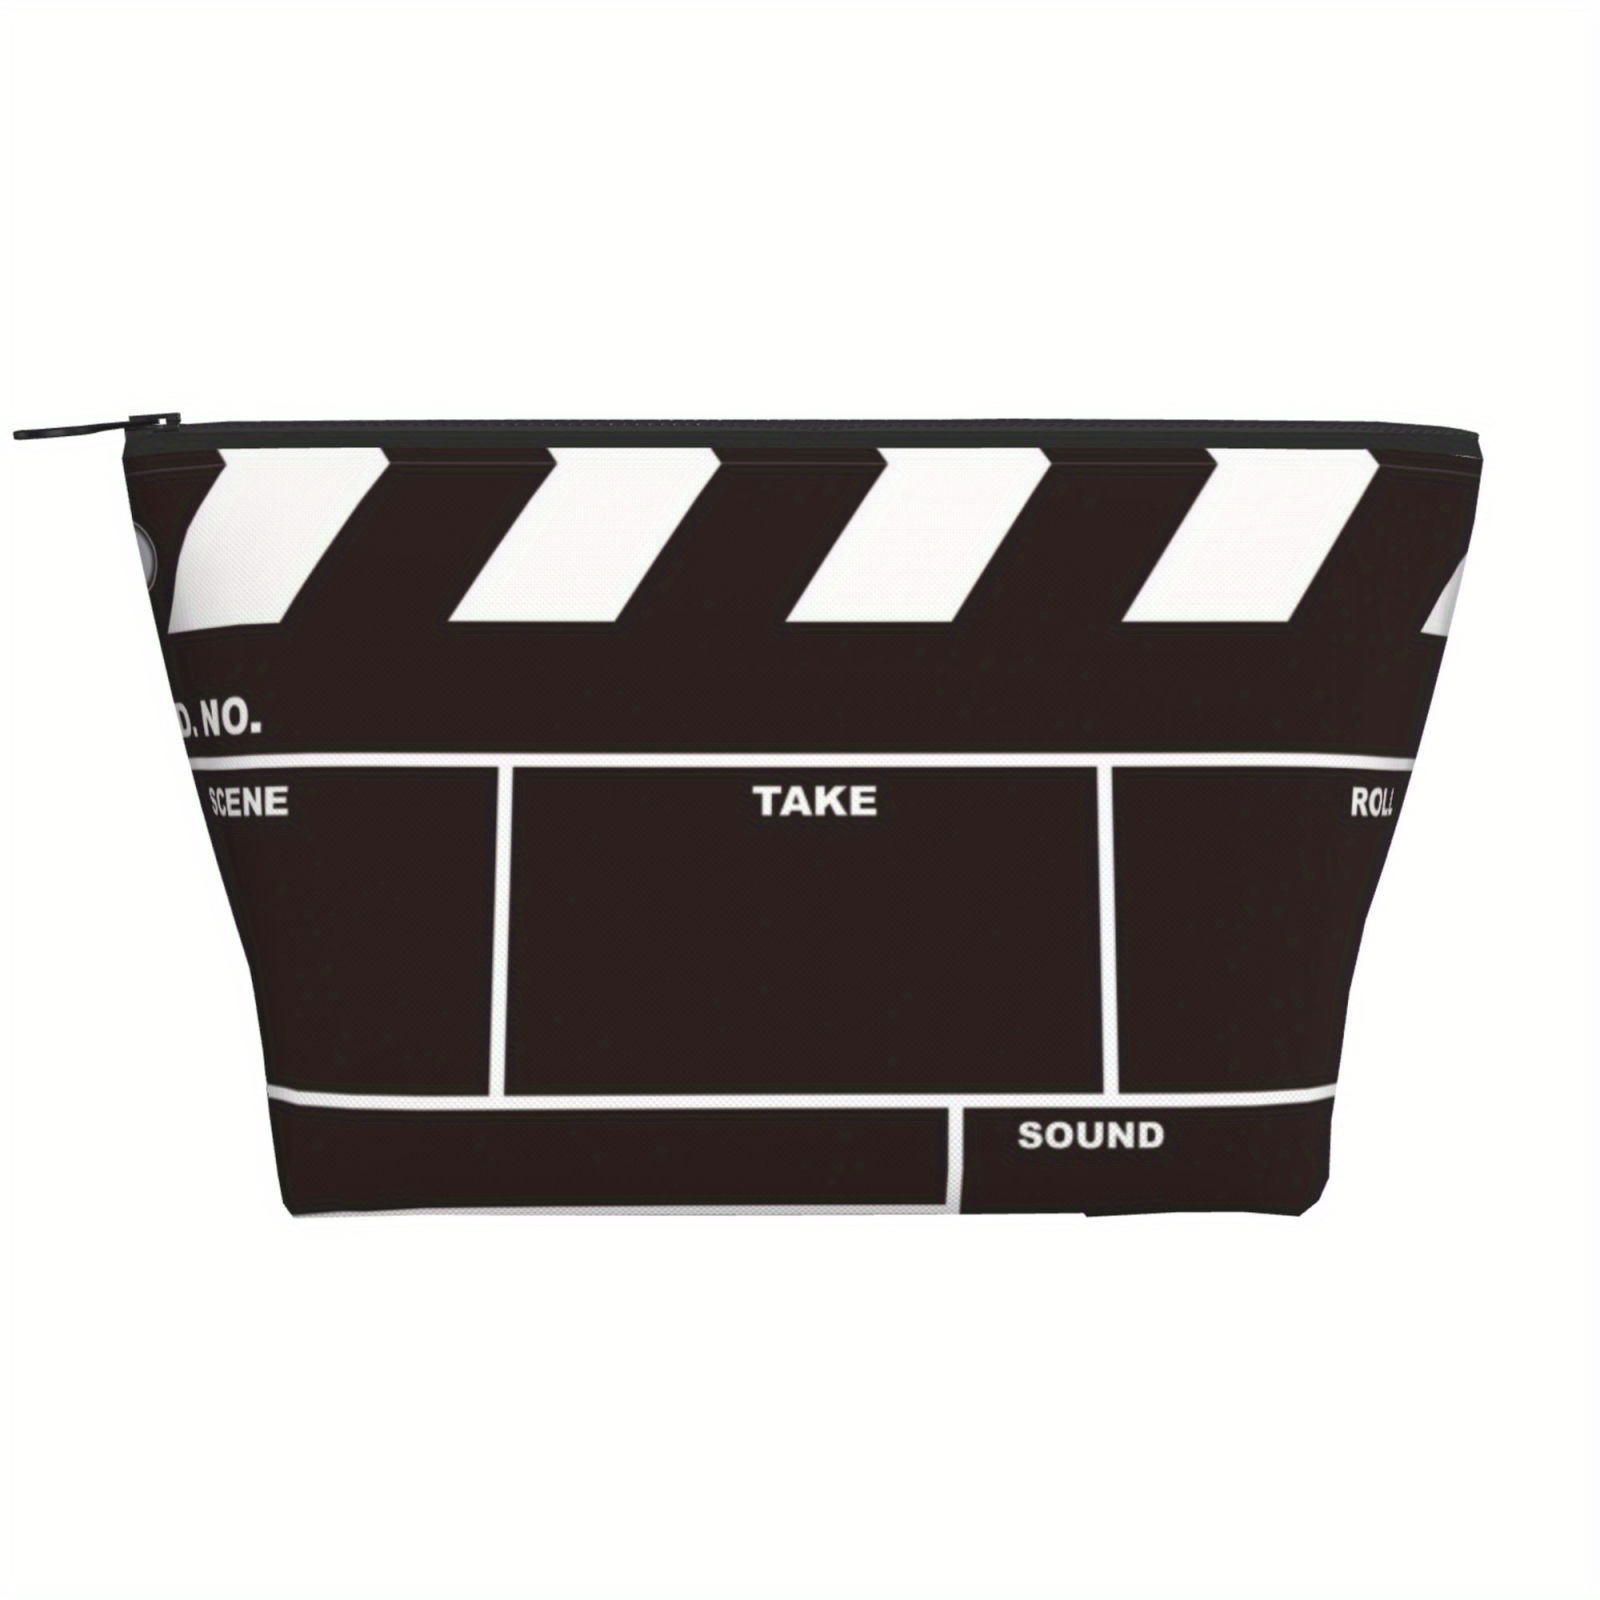 

Black Movie Clapboard Pattern Cosmetic Bag, Portable Travel Zipper Storage Bag, Cosmetic Travel Bag, Toiletry Bag, Multifunctional Makeup Bag Suitable For Gifts And Surprise Travel